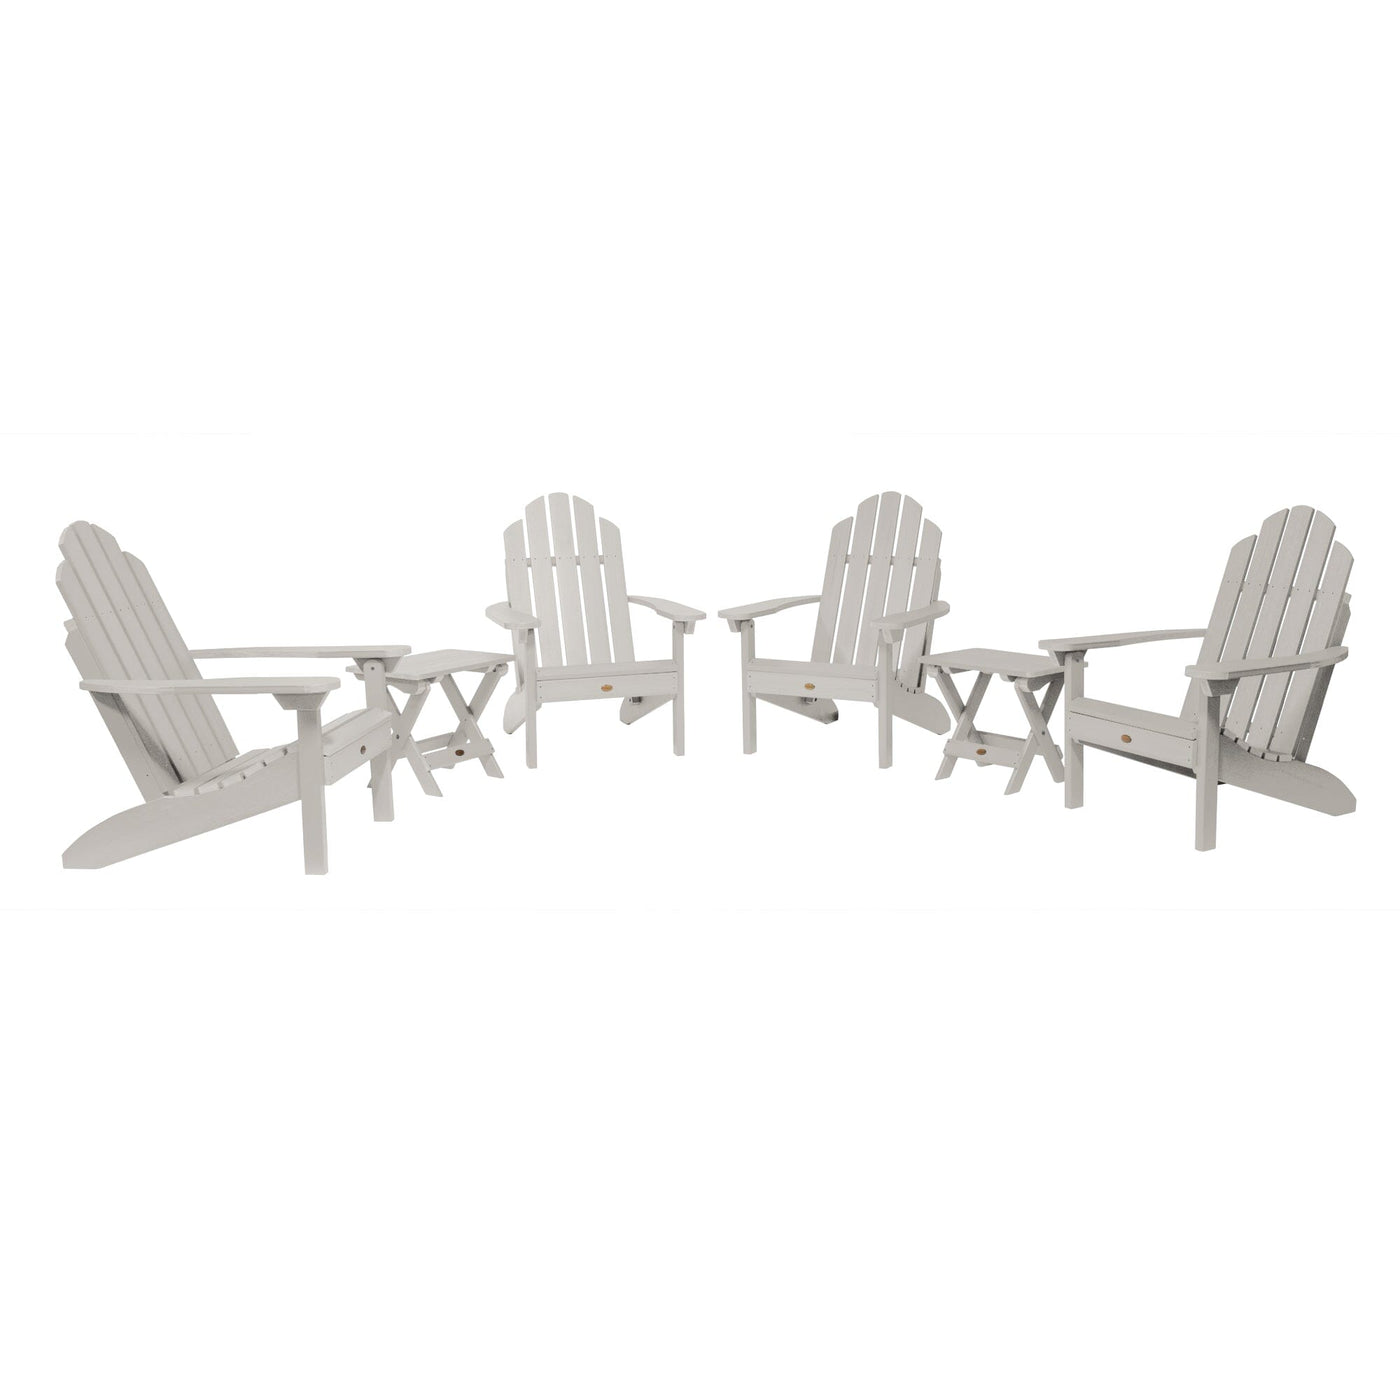 4 Classic Westport Adirondack Chairs with 2 Folding Side Tables Kitted Sets Highwood USA Harbor Gray 